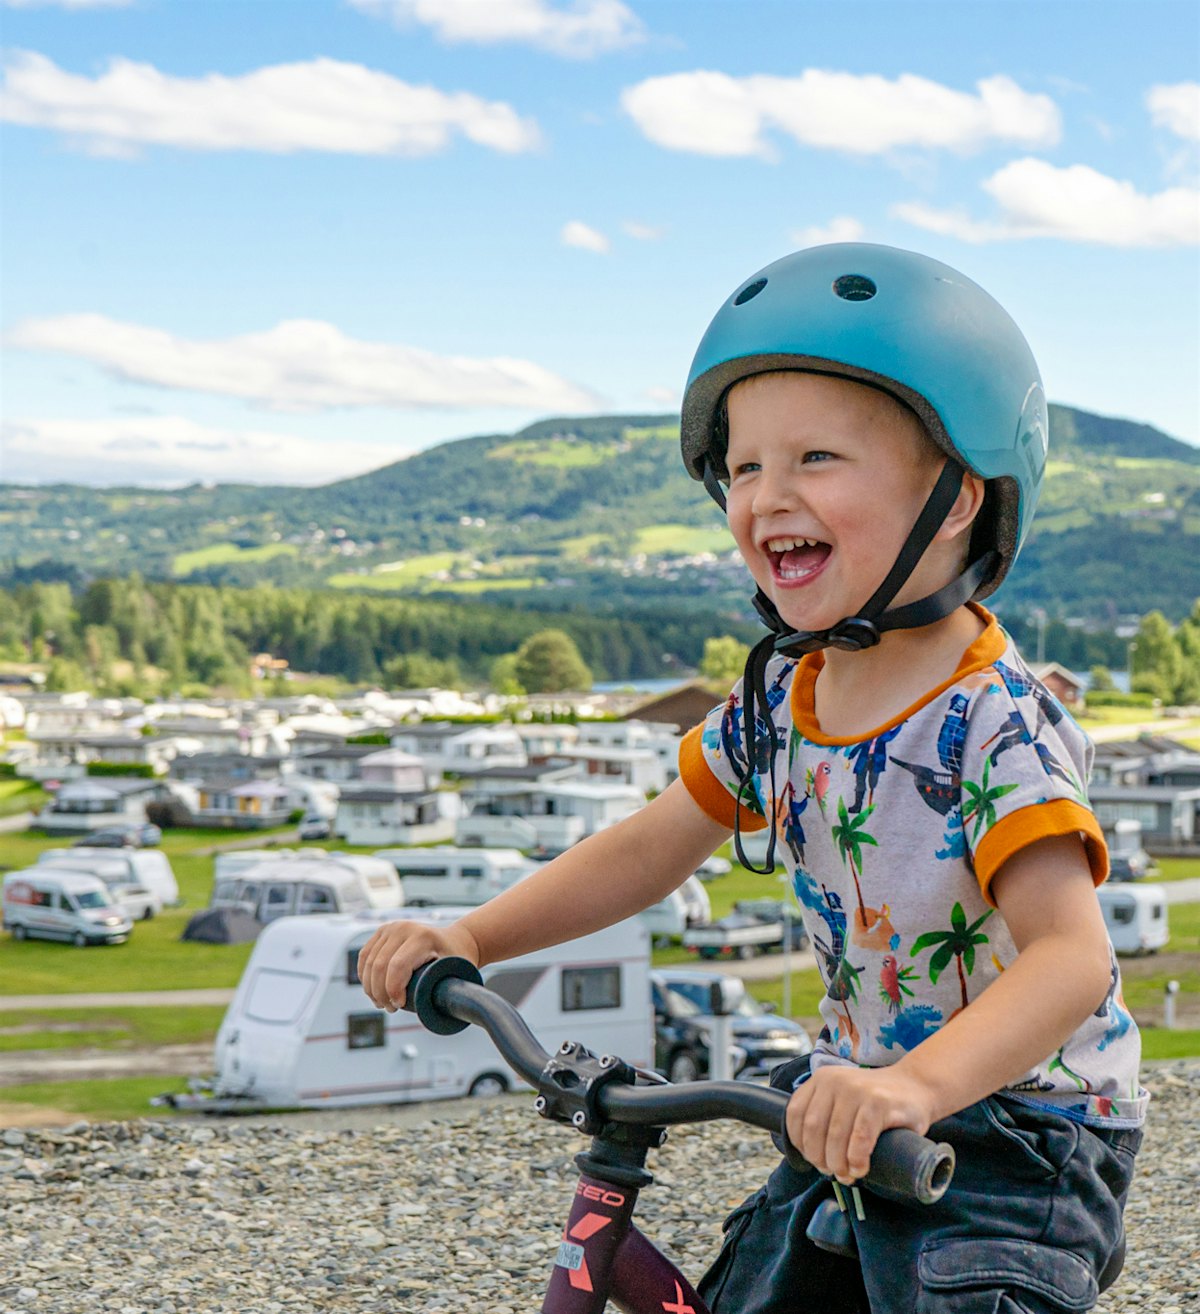 Boy smiles and laughs while sitting on a bicycle, with campsite in the background. Photo